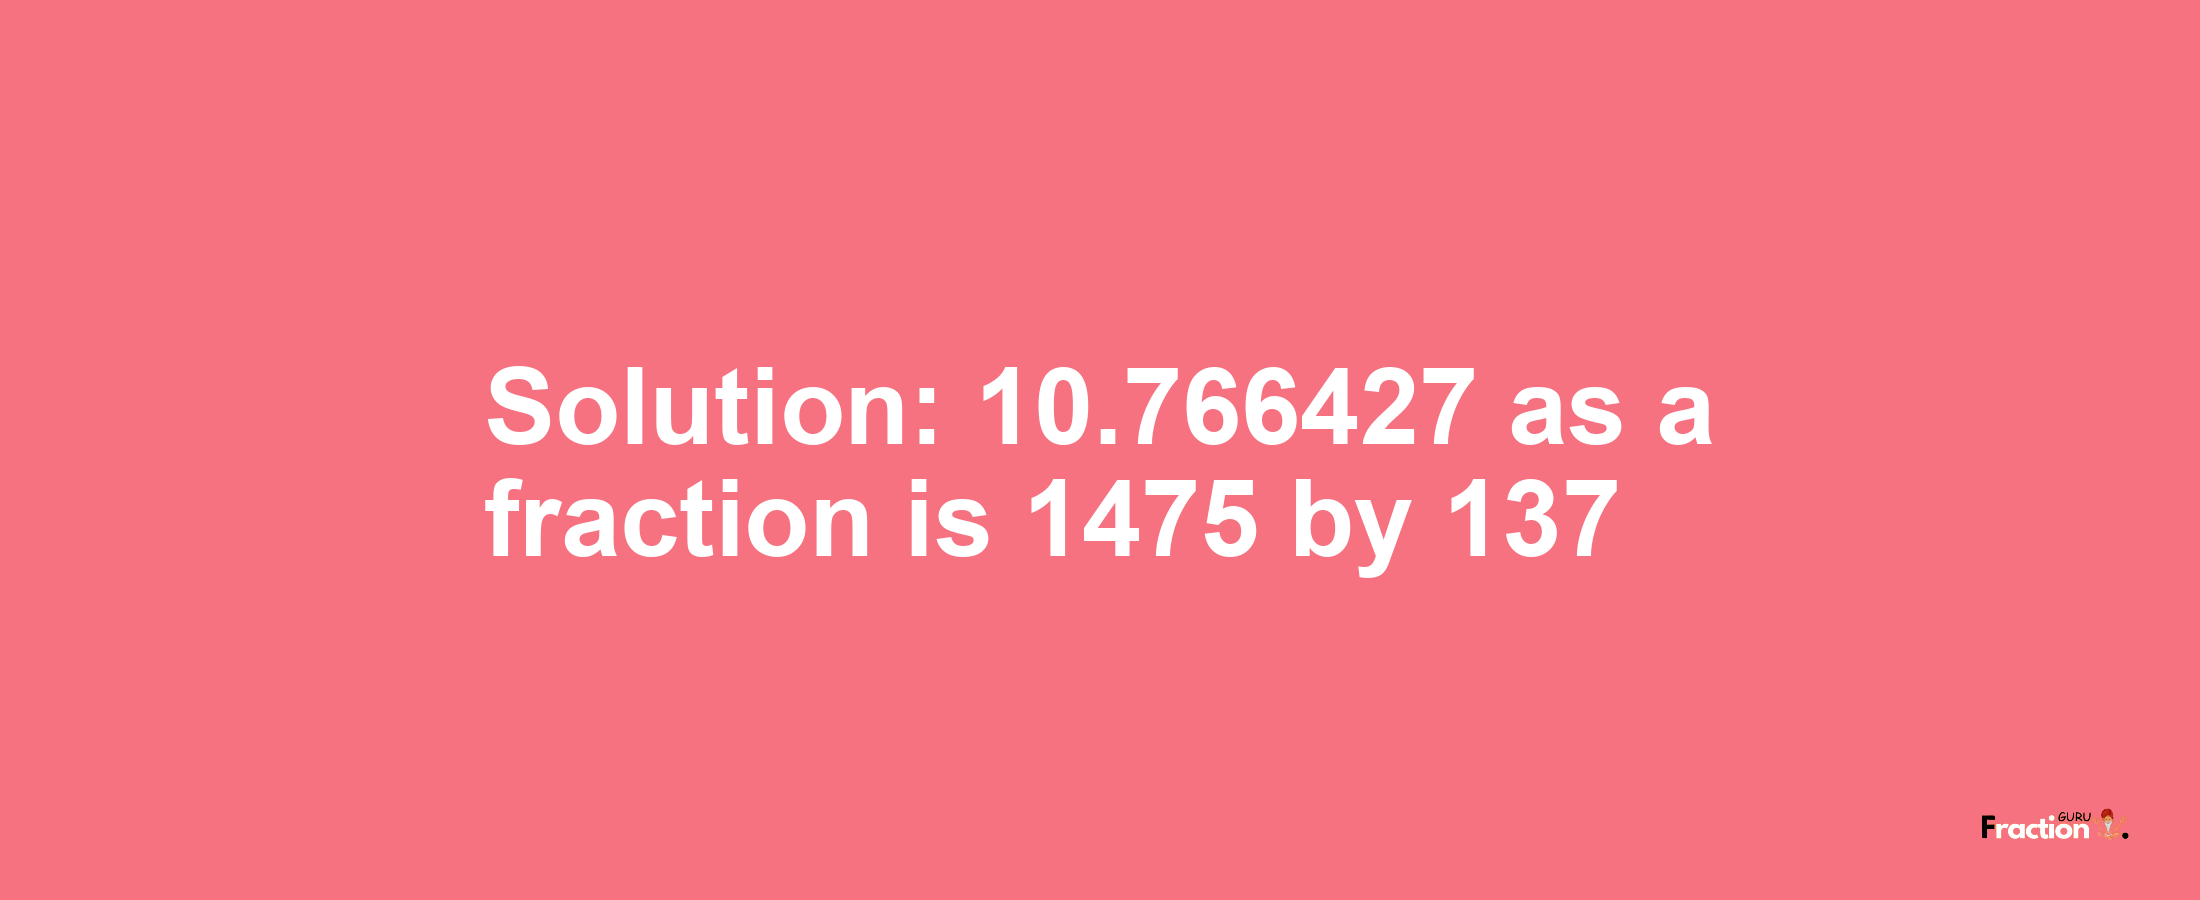 Solution:10.766427 as a fraction is 1475/137